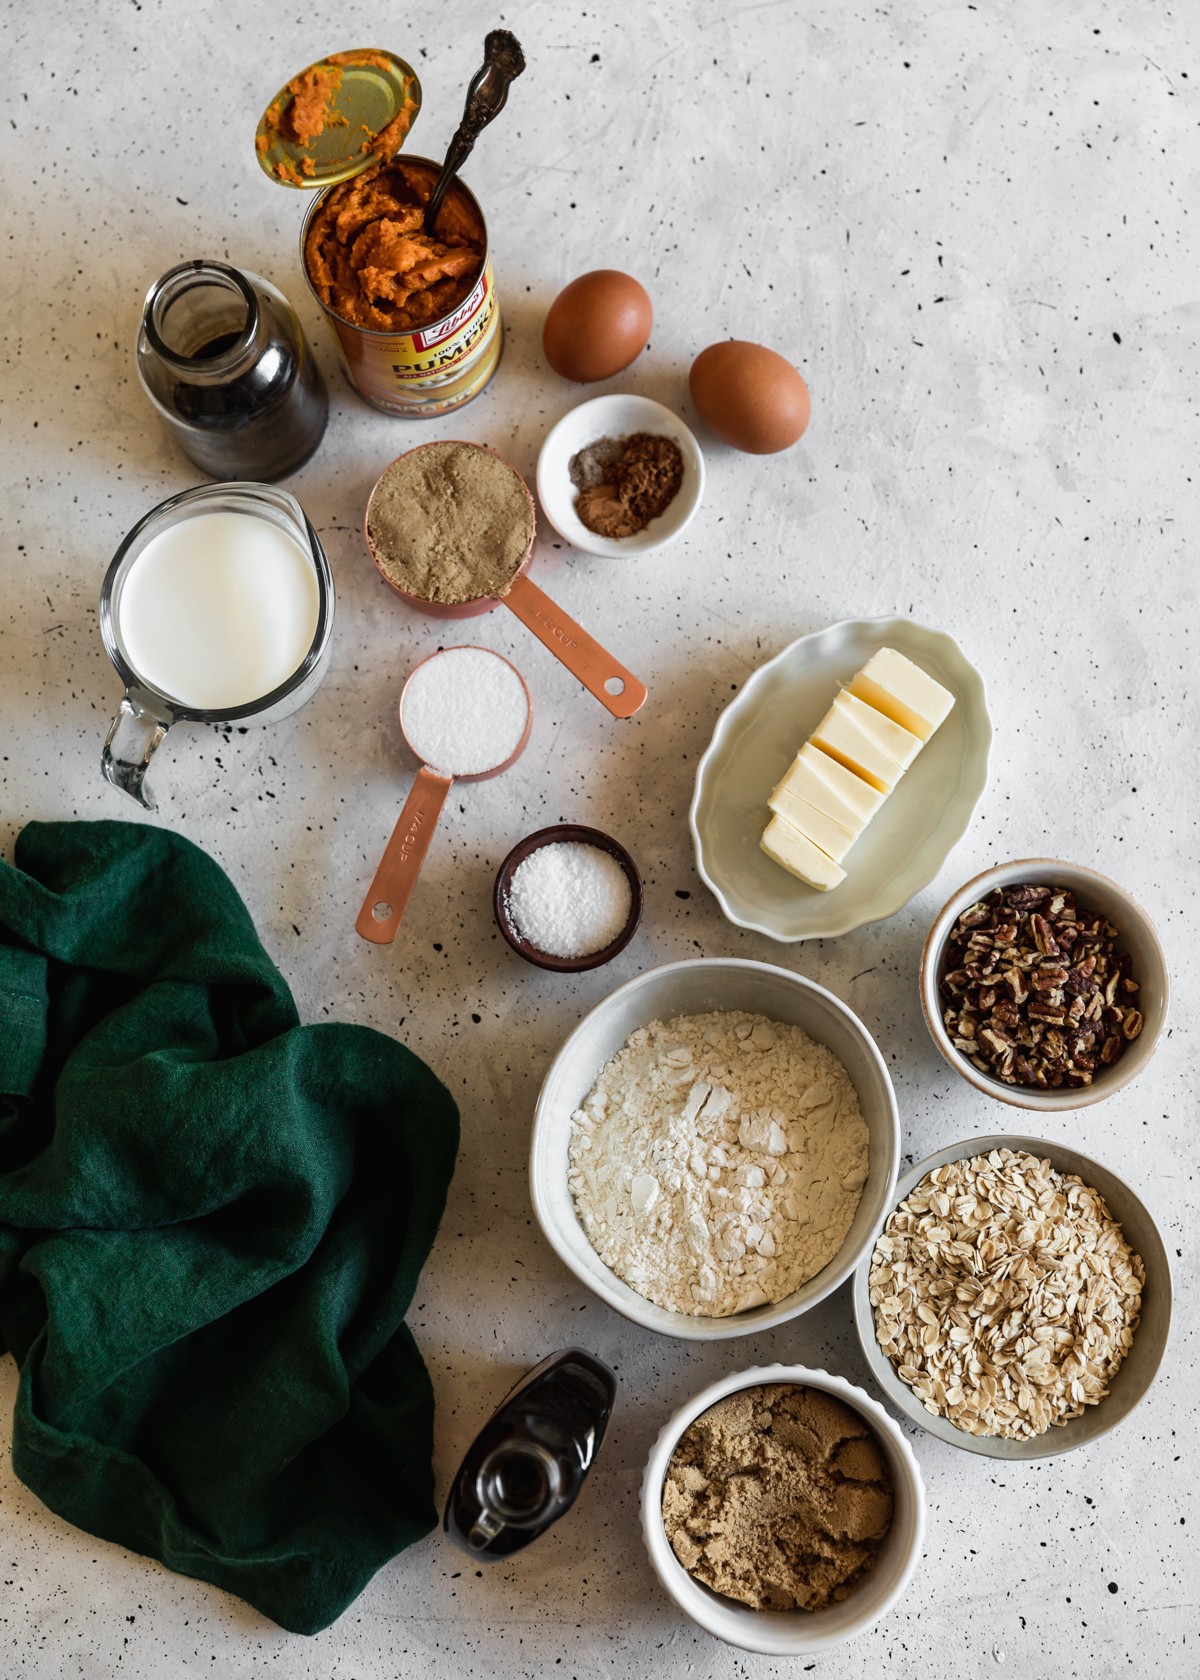 An overhead of various white and grey bowls with baking ingredients like flour, oats, pecans, sugar, and butter on a white speckled counter next to a can of pumpkin and dark green linen.